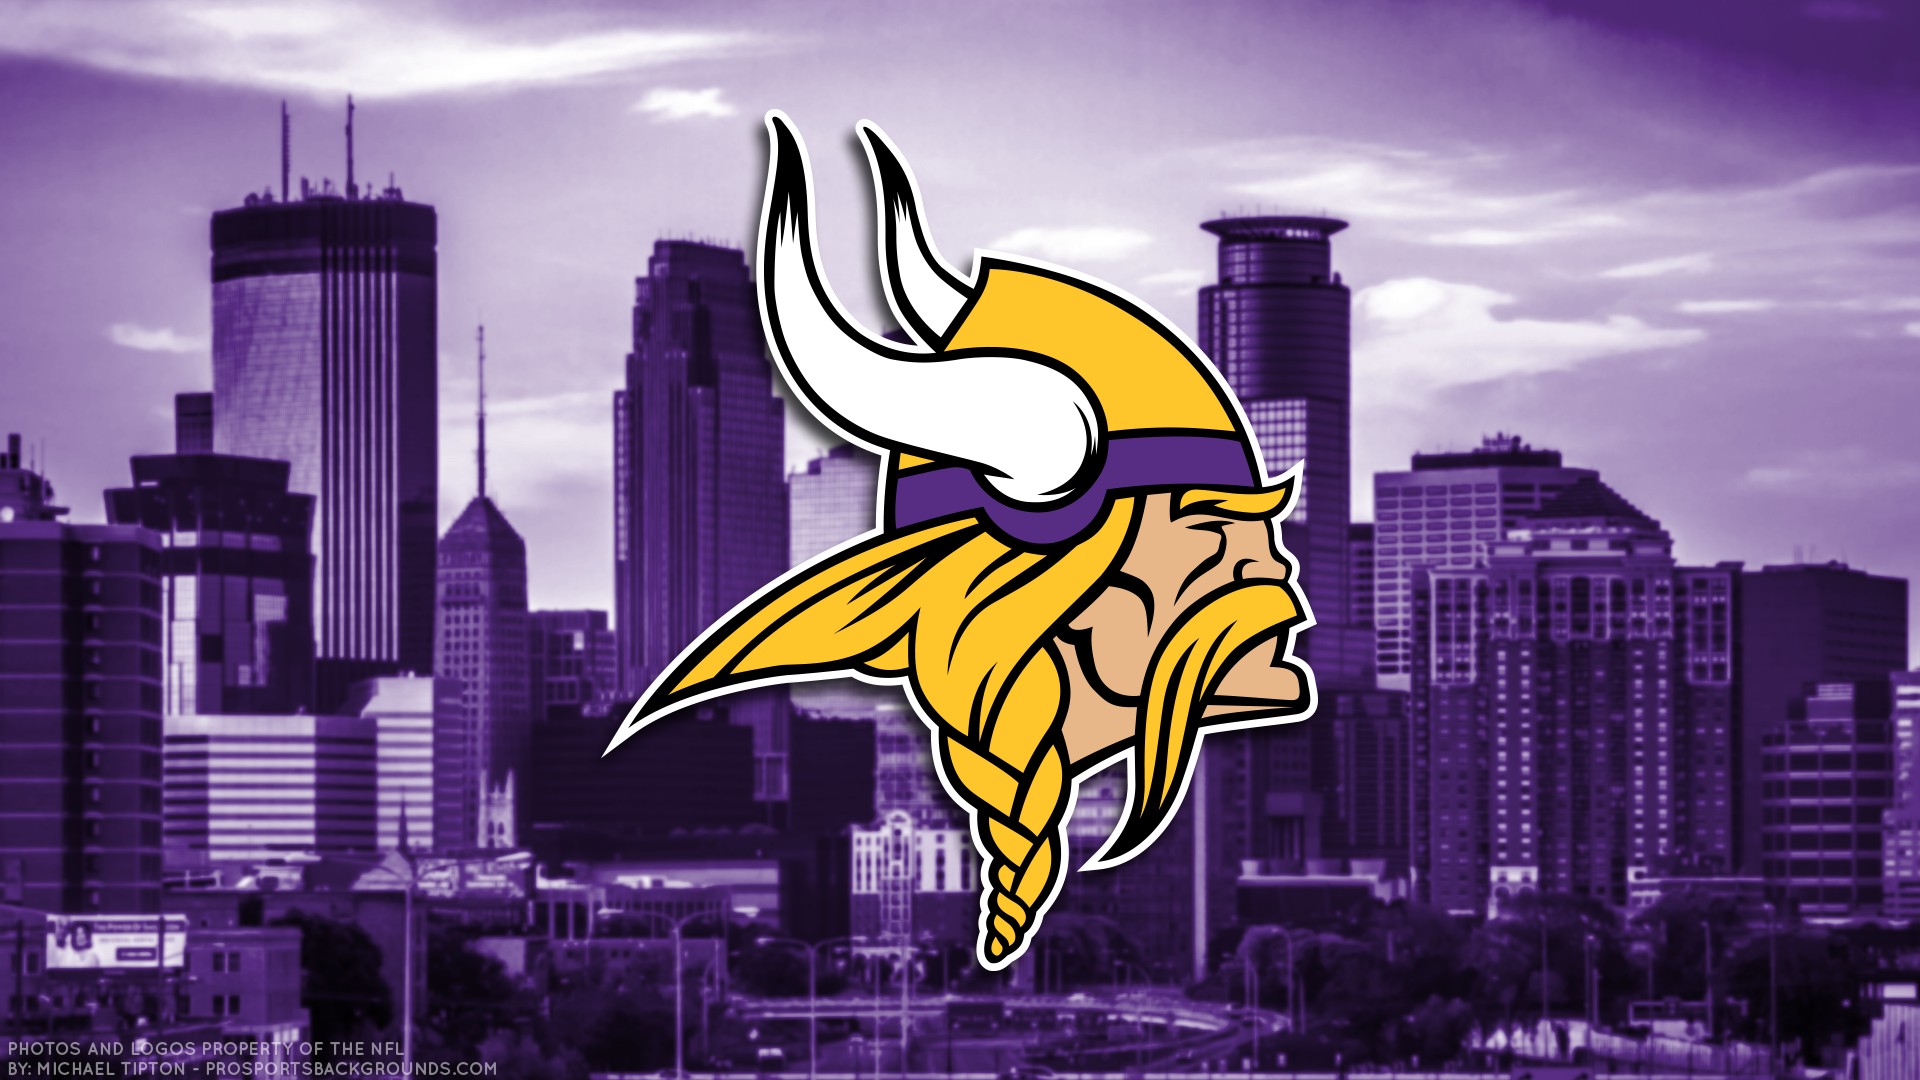 Windows Wallpaper Minnesota Vikings With Resolution 1920X1080 pixel. You can make this wallpaper for your Mac or Windows Desktop Background, iPhone, Android or Tablet and another Smartphone device for free